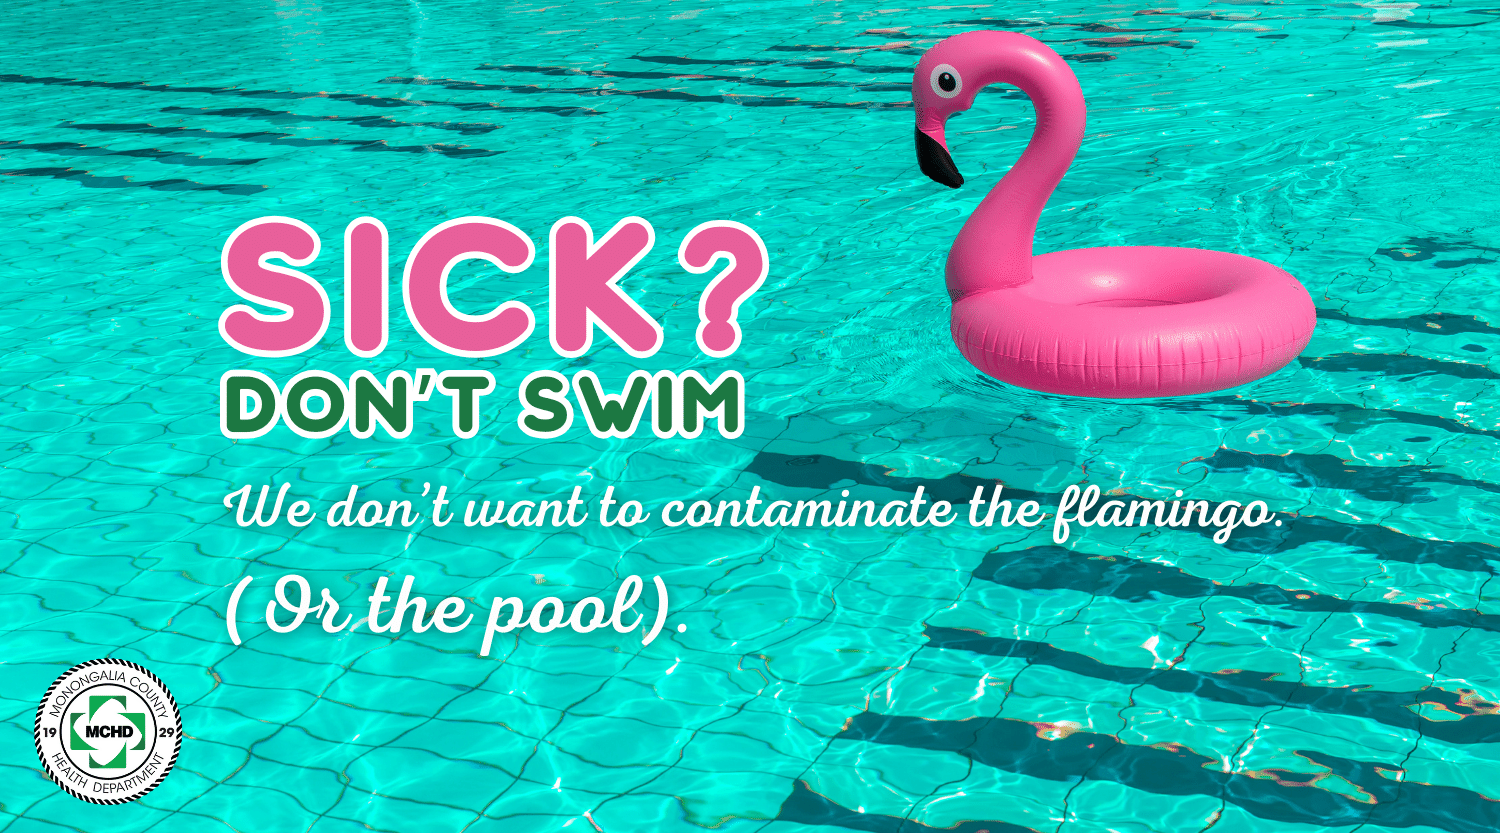 The No. 1 rule for swimming in pools